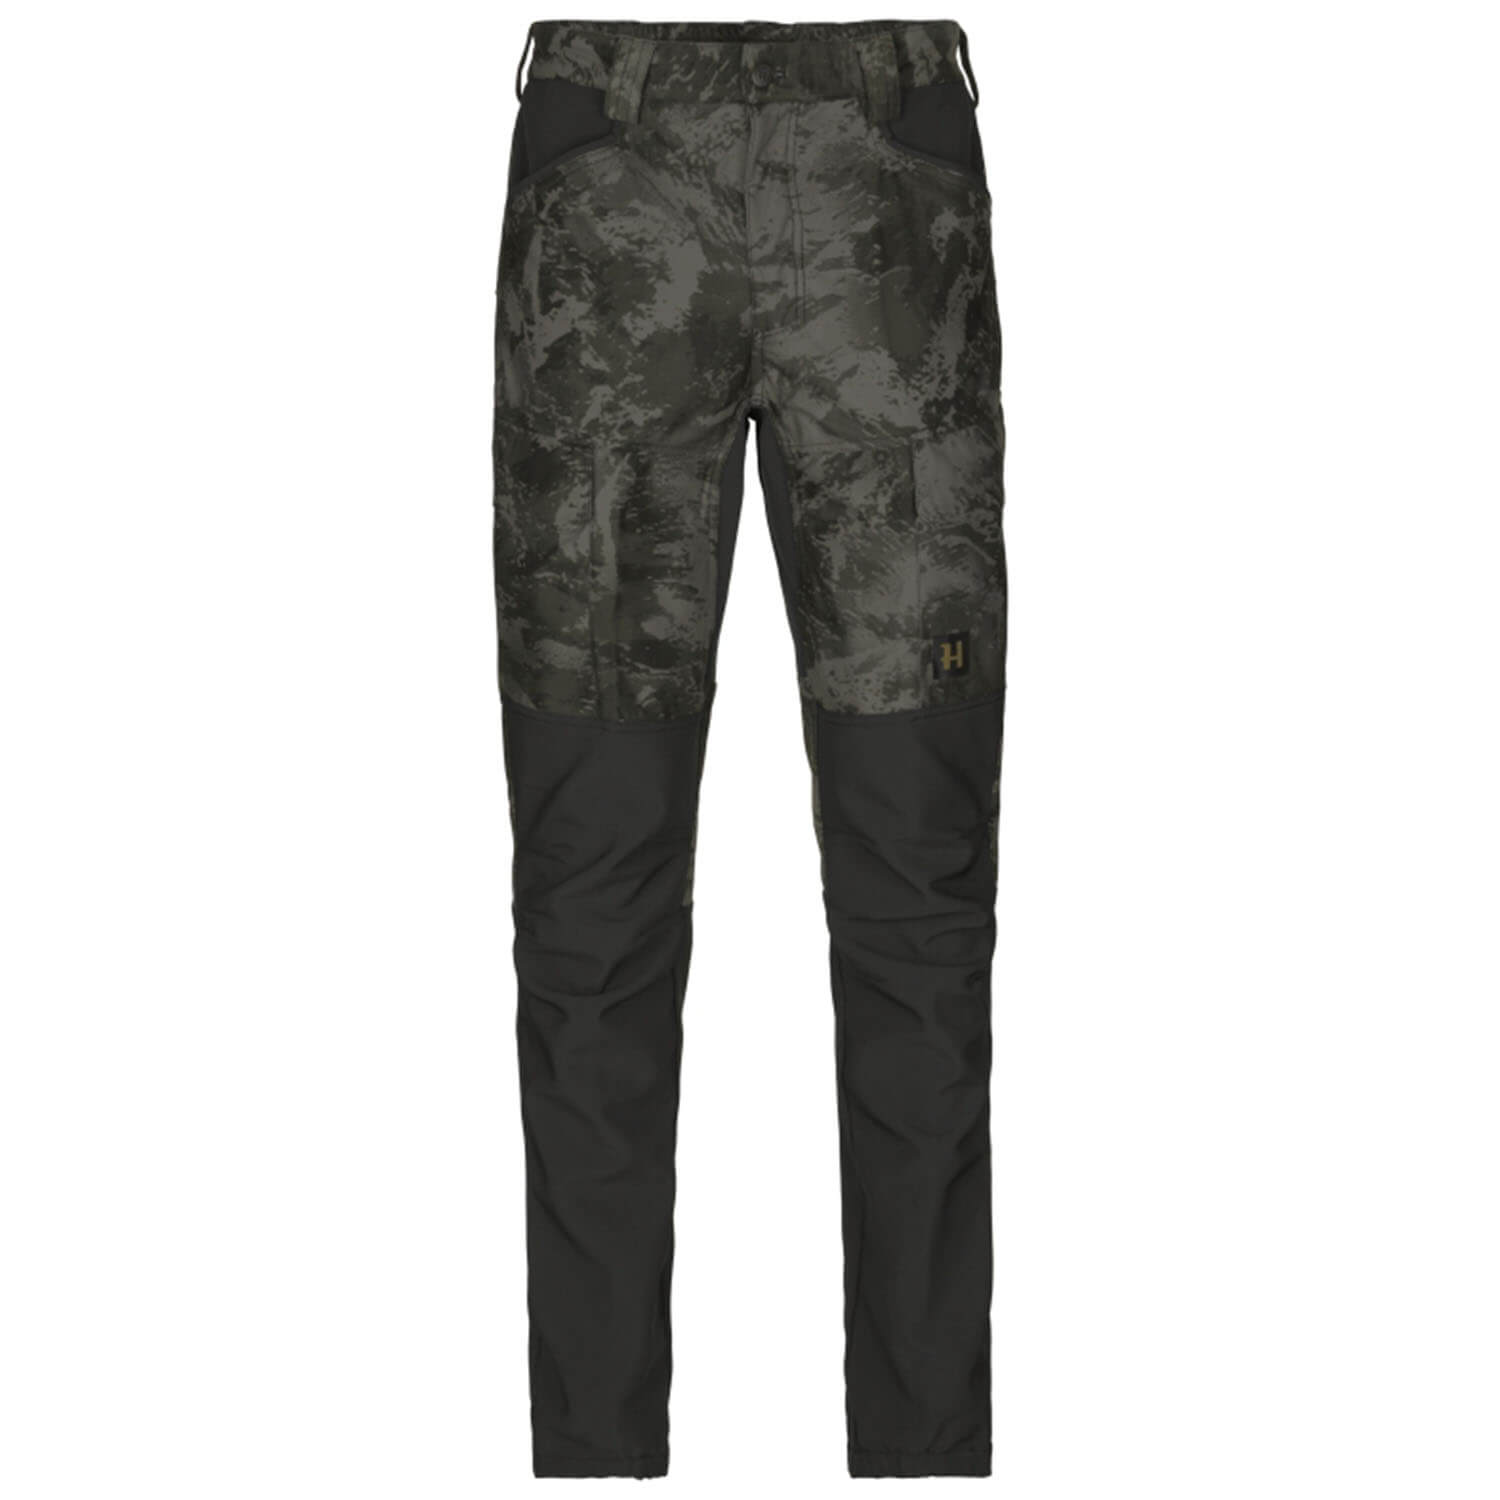 Härkila hunting trousers Noctyx Camo Silent - Camouflage Clothing